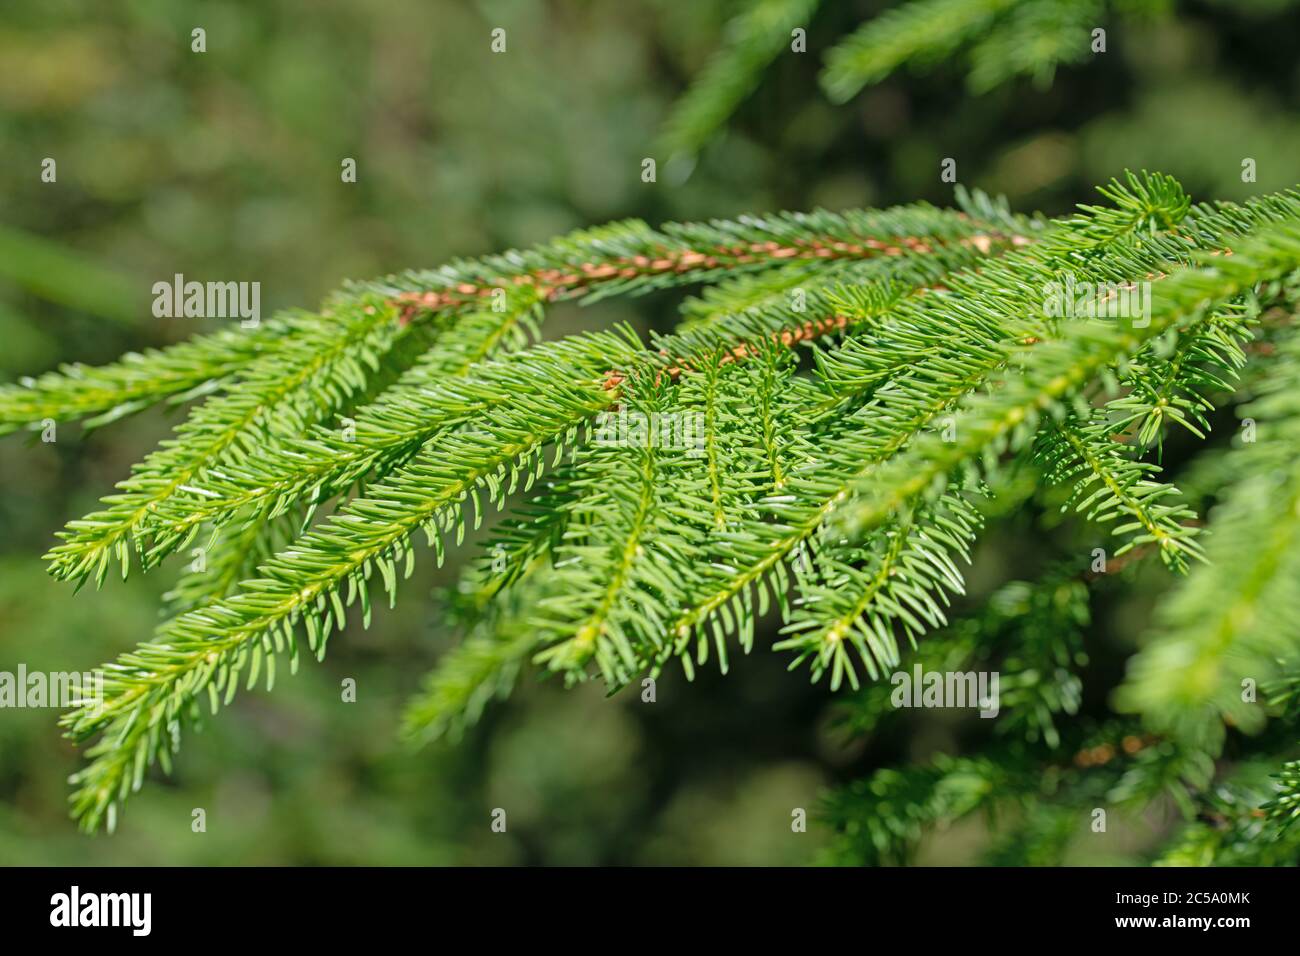 Spruce branches in a close-up Stock Photo